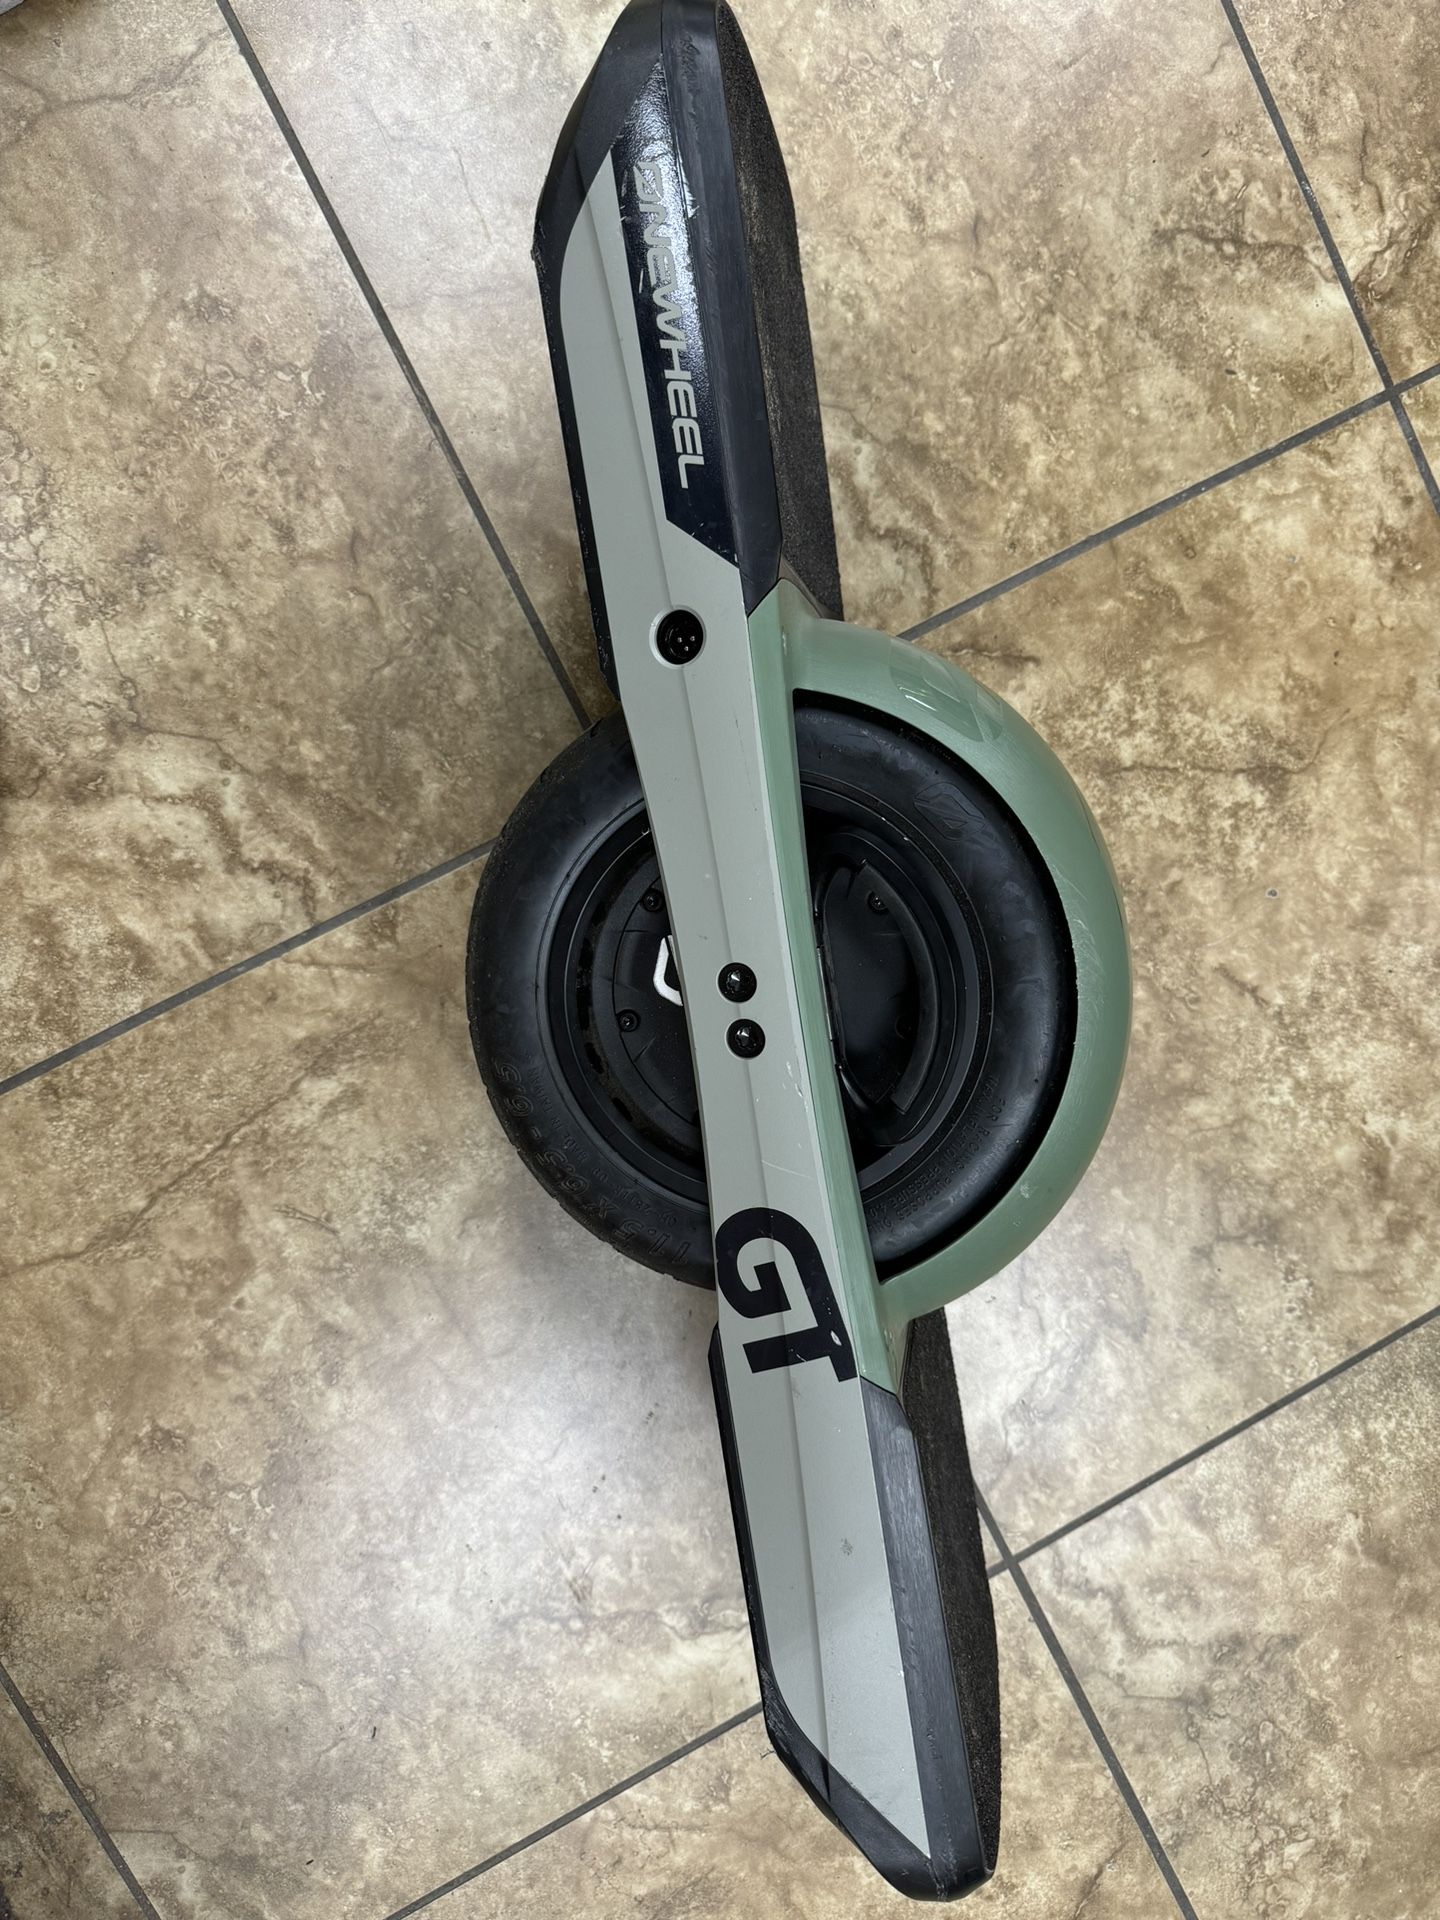 Onewheel GT Like New With Low Miles. Less Than 50 Miles.